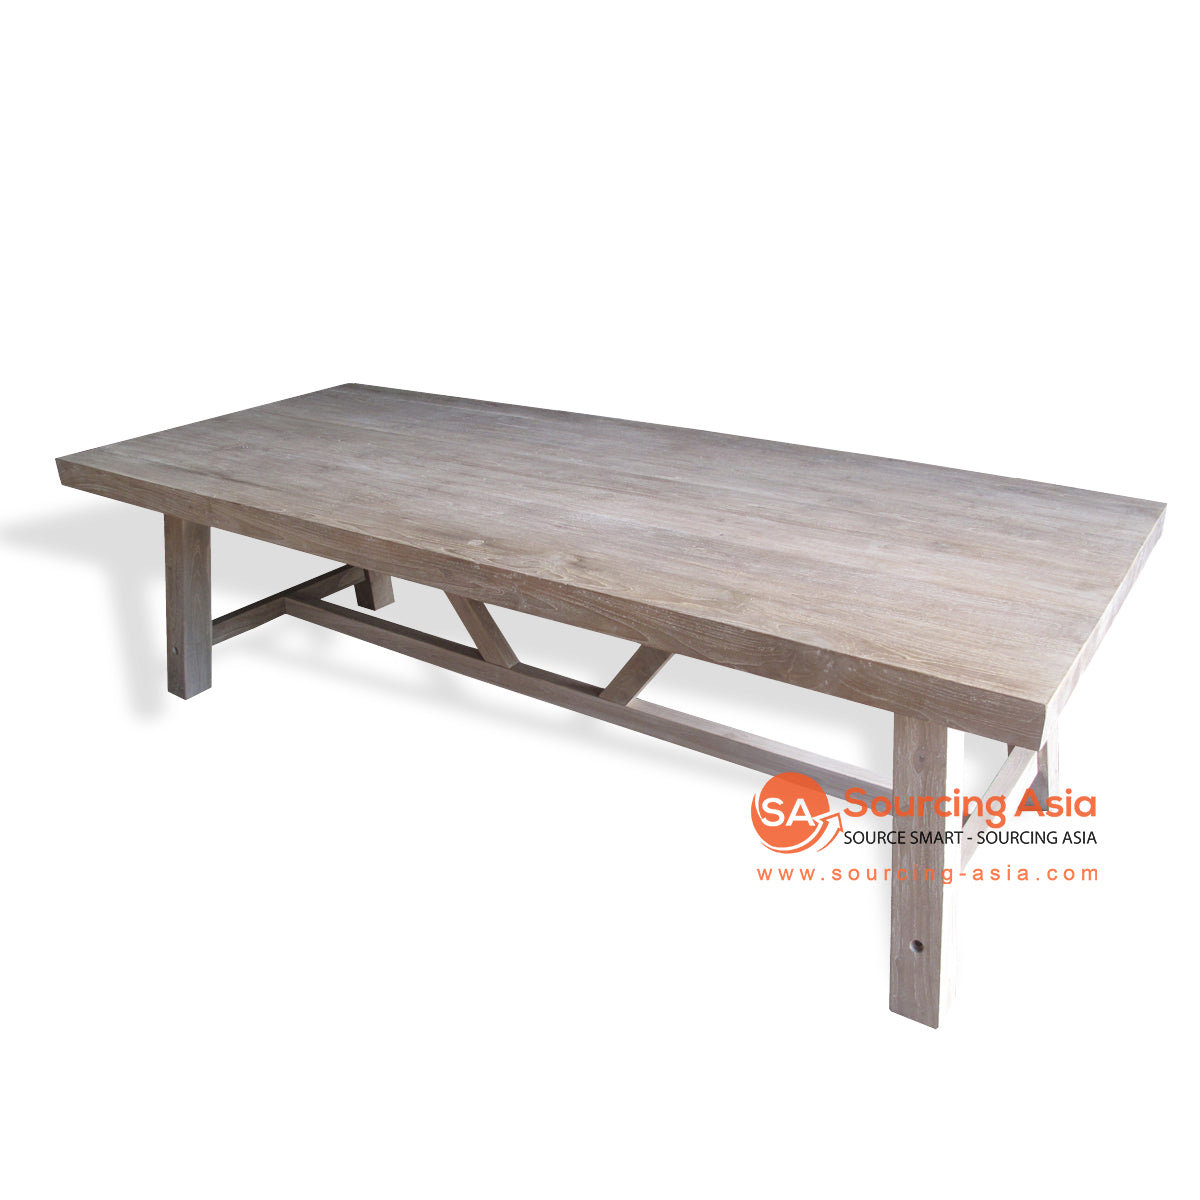 ECL033 WHITE WASH RECYCLED TEAK WOOD DINING TABLE